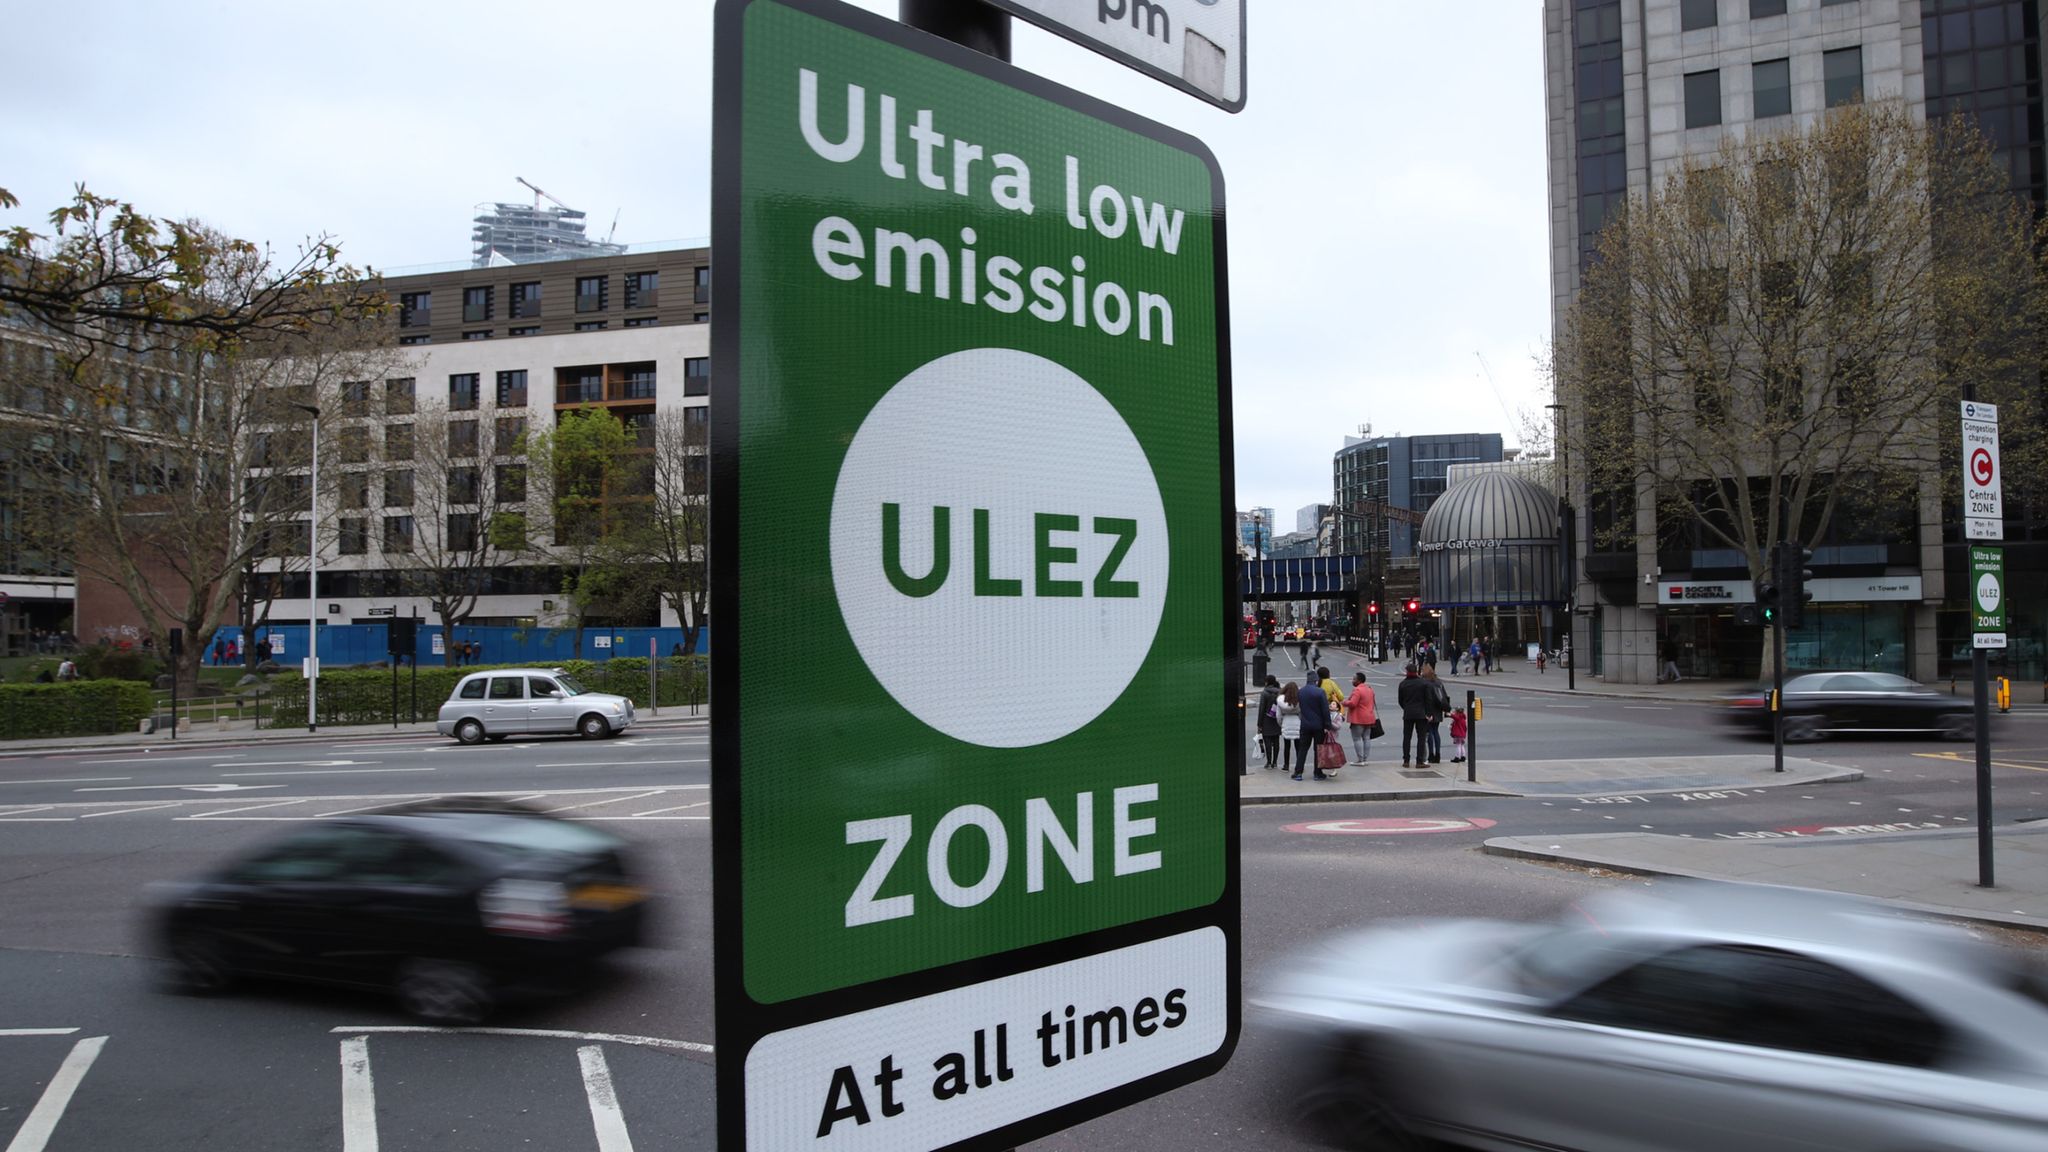 Ultra Low Emissions Zone (ULEZ) sign in London with traffic in the background